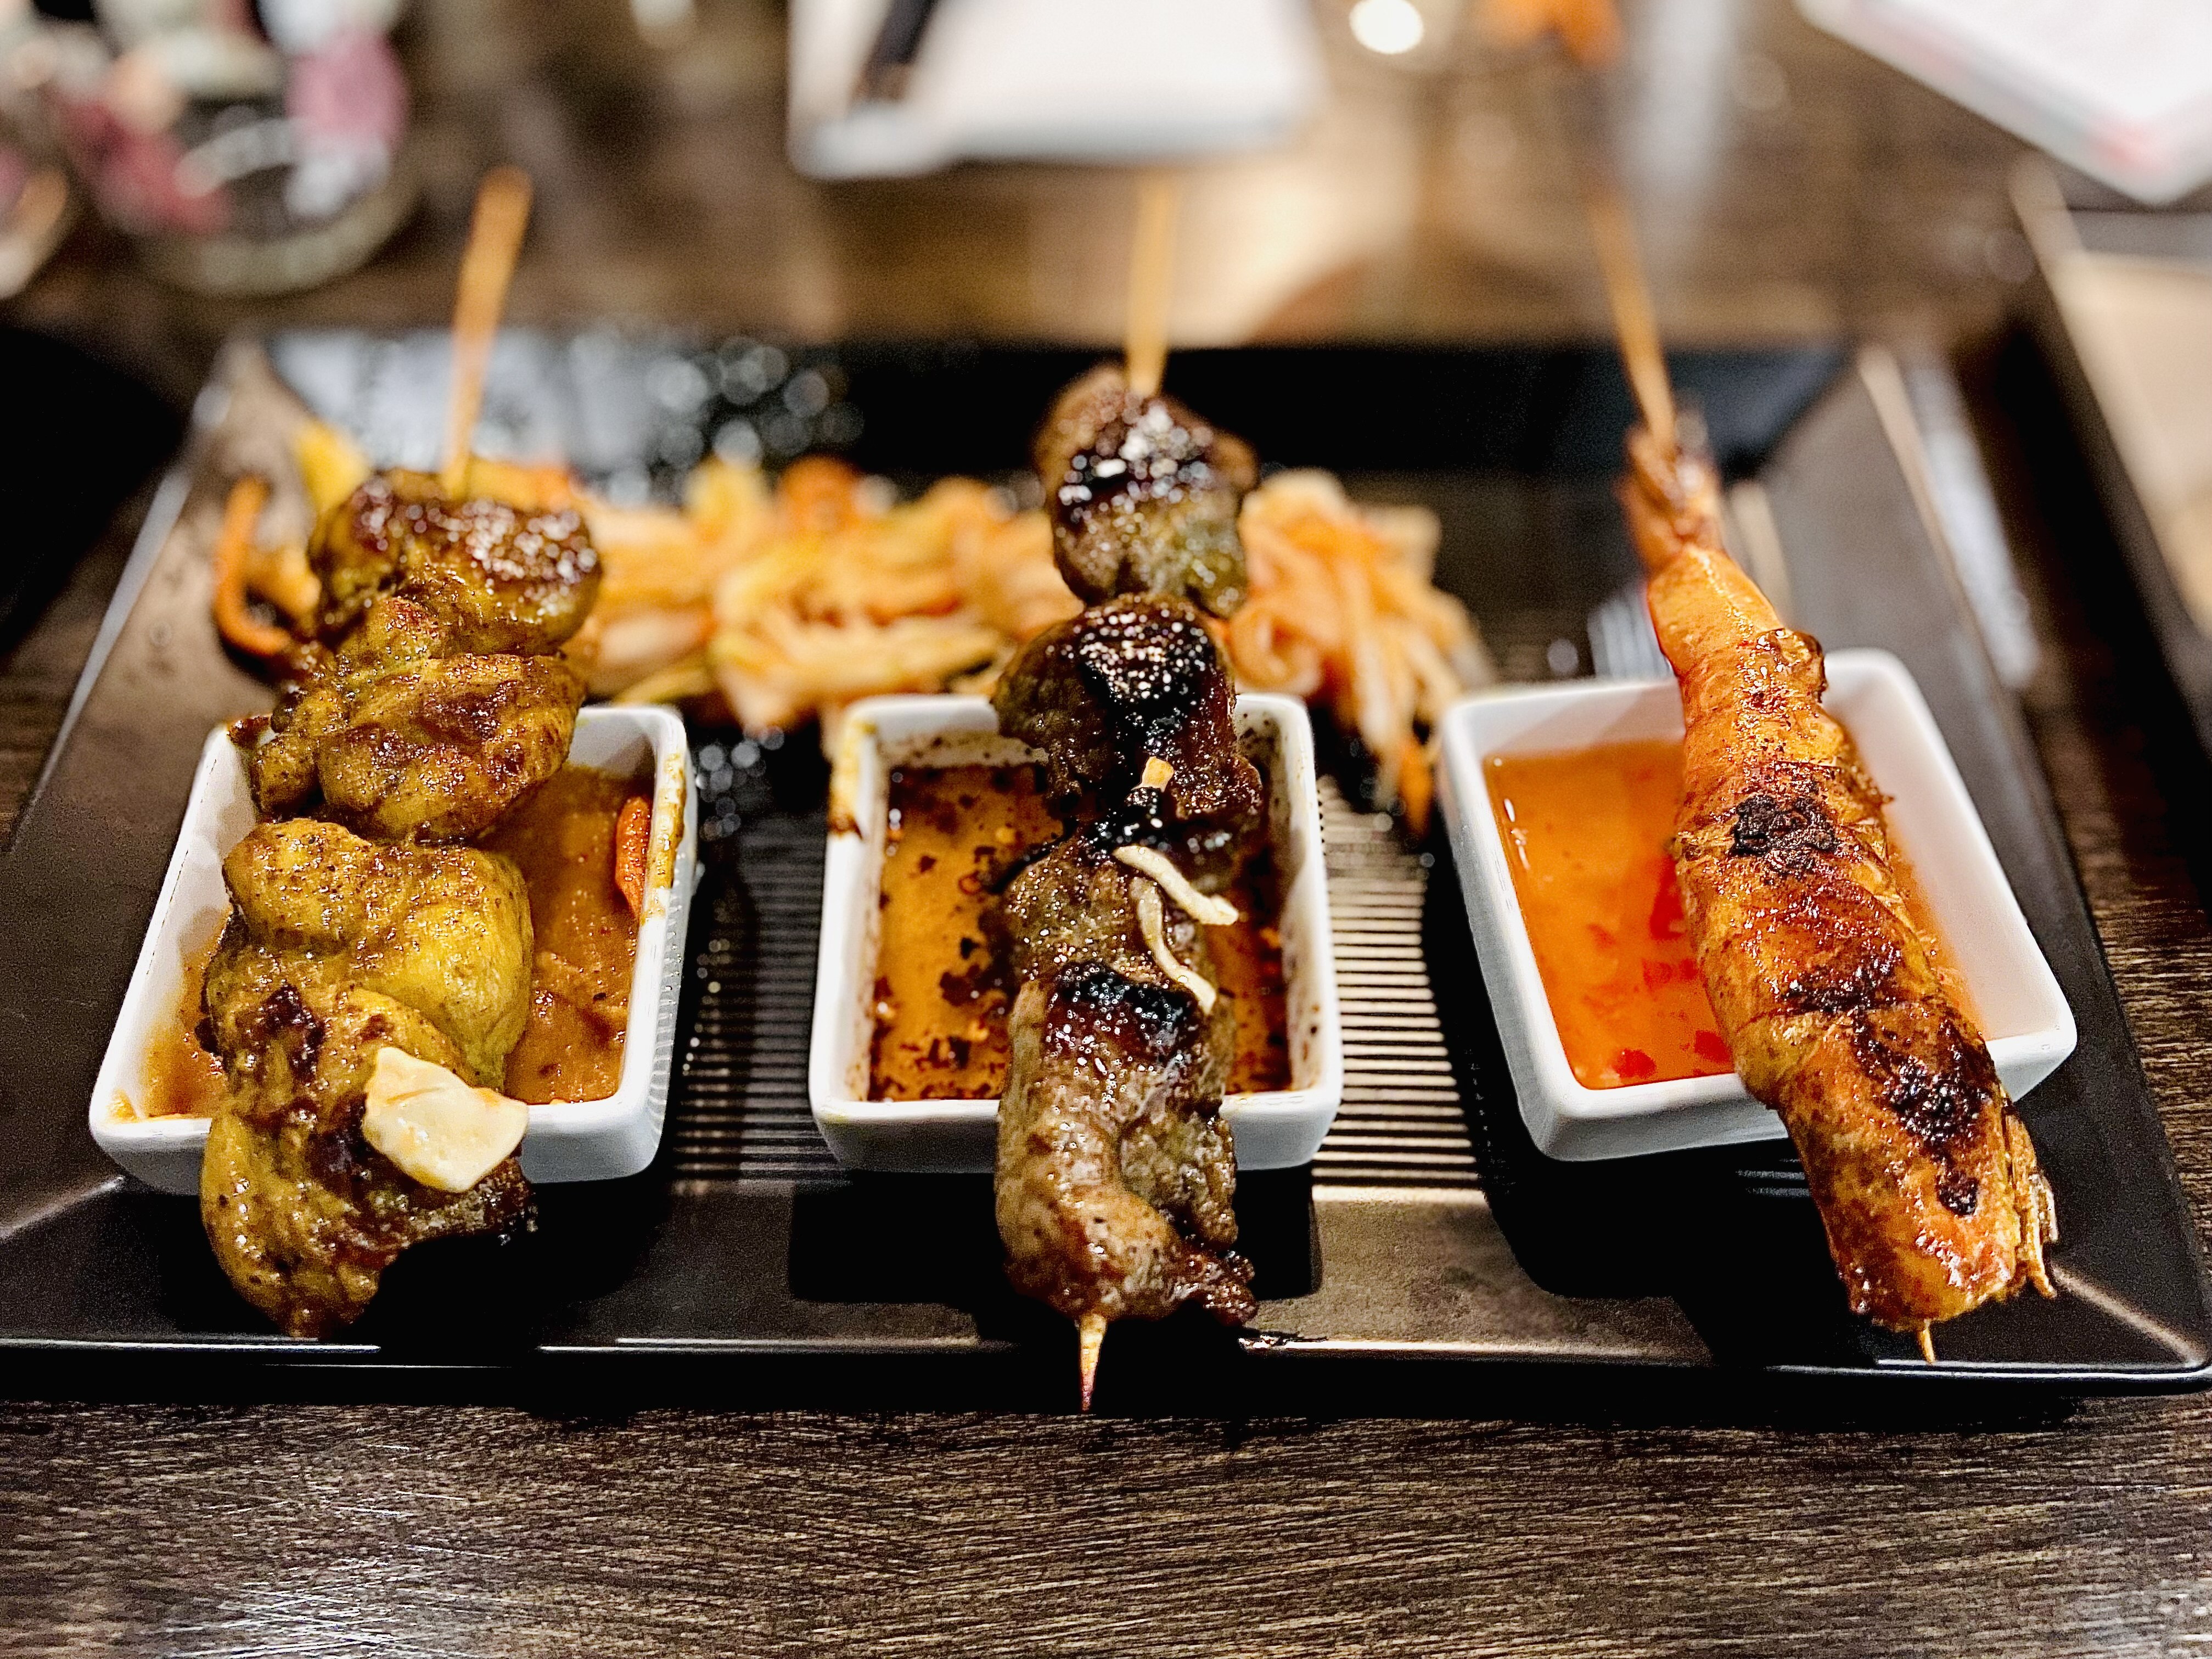 Skewers and condiments at Sticx.